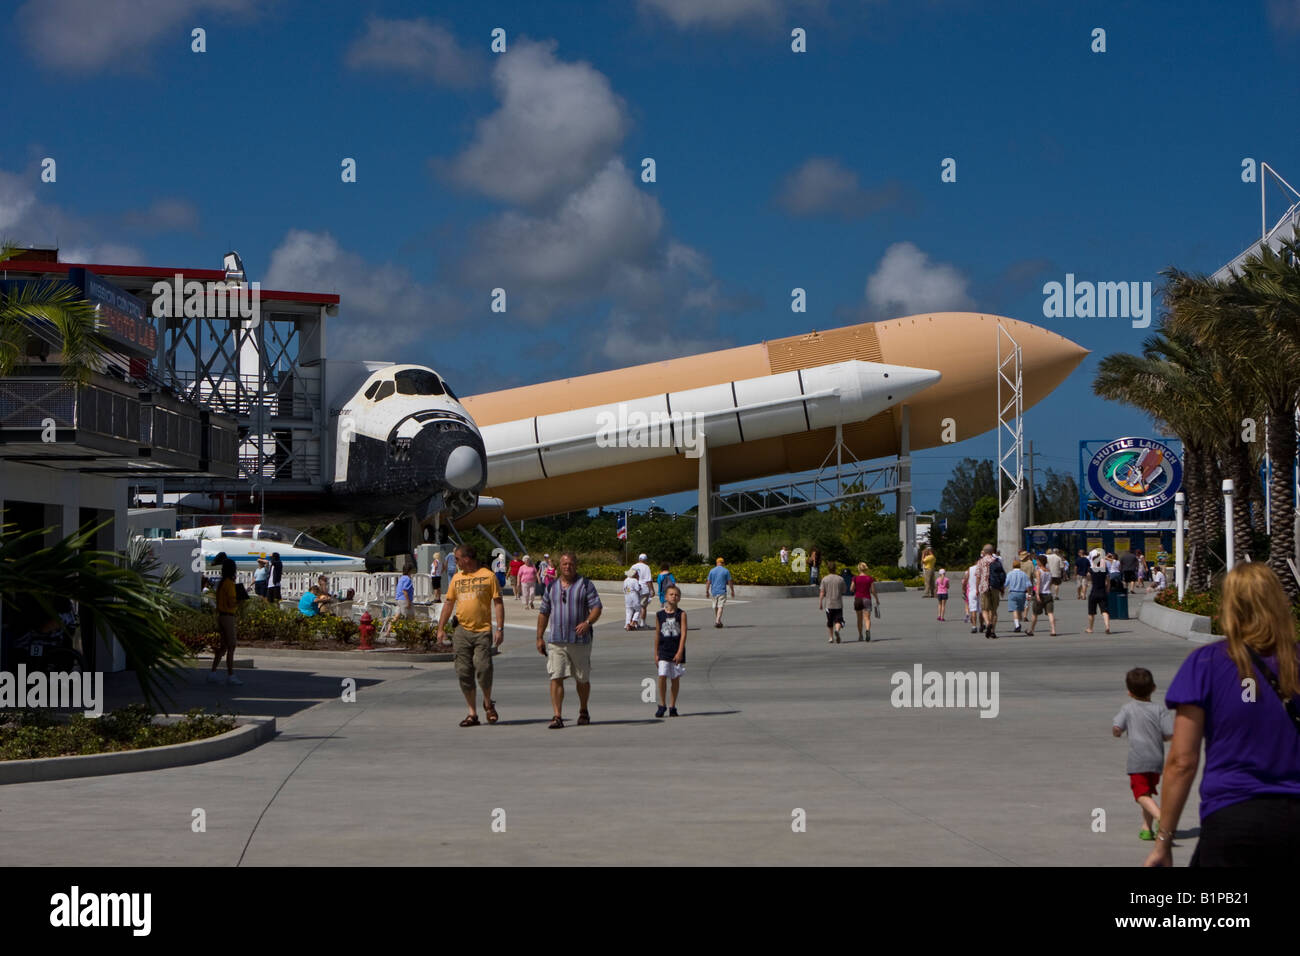 Space Shuttle, externen Tank und Rocket Booster Display an John F Kennedy Space Center in Cape Canaveral Florida Stockfoto